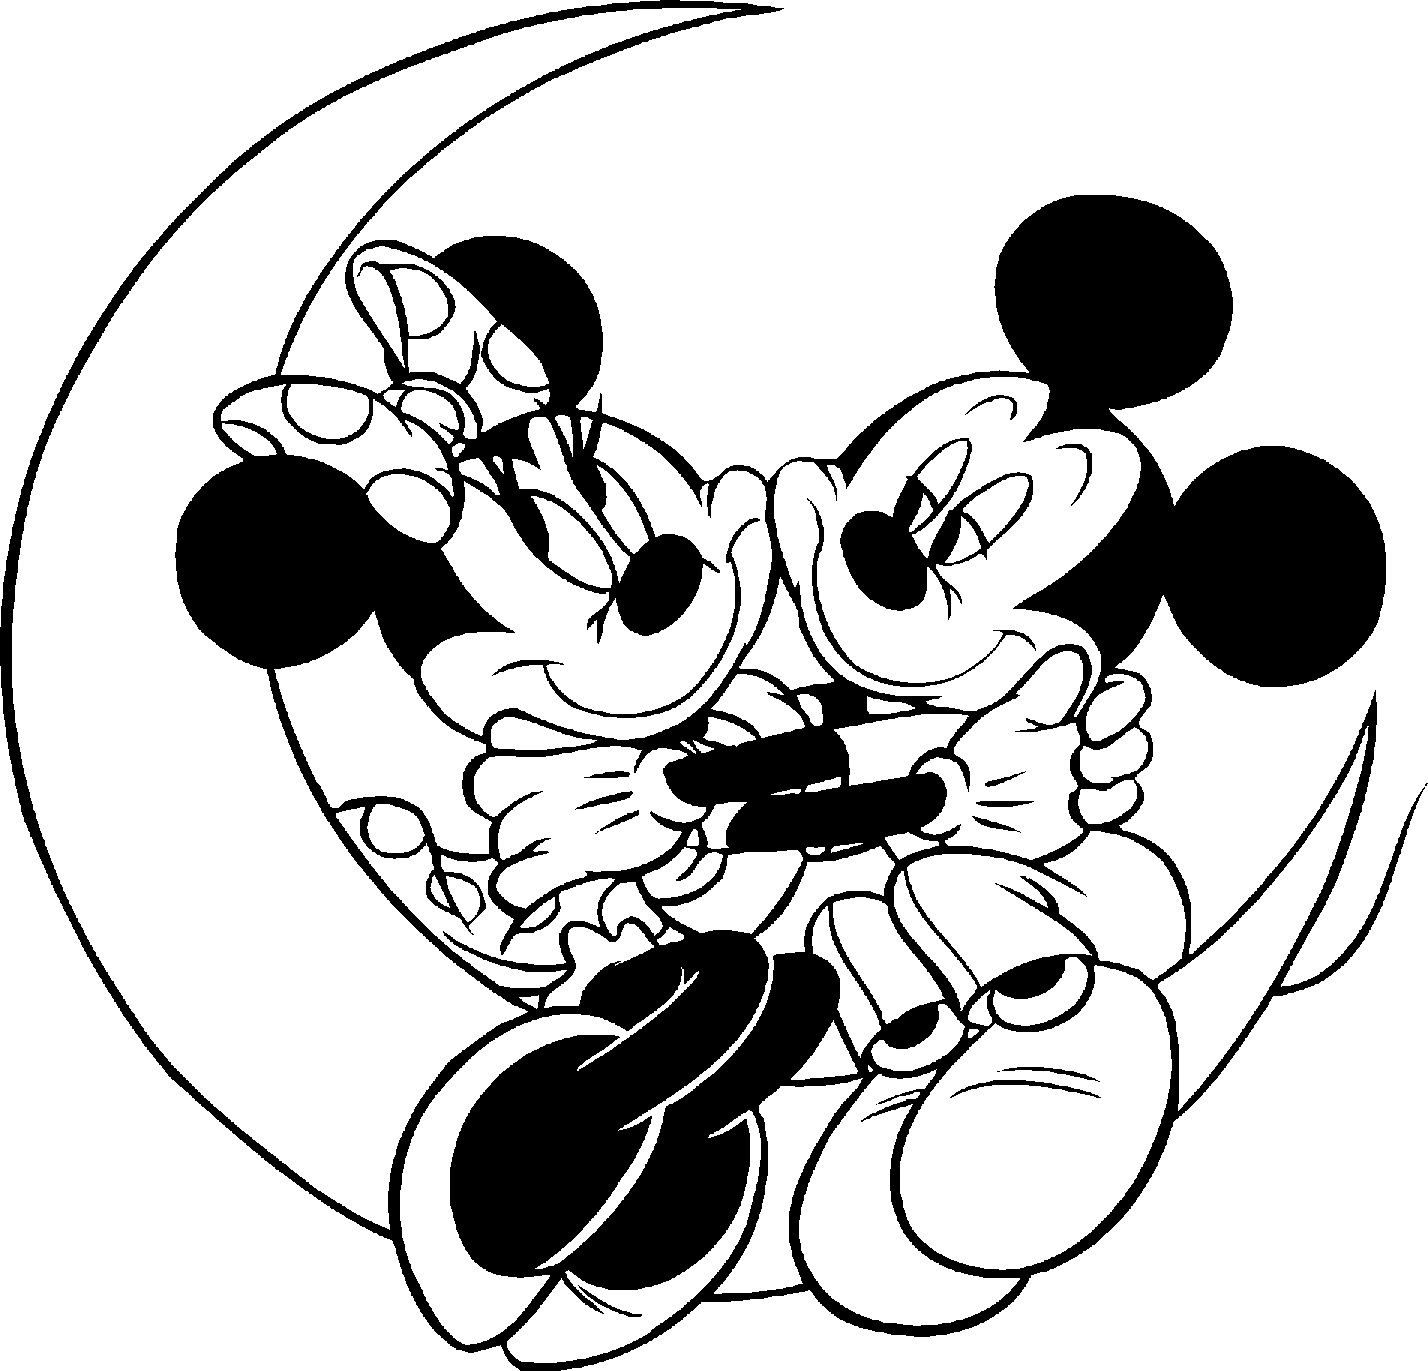 mickey-mouse-coloring-page-free-mickey-mouse-coloring-pages-taman-ilmu